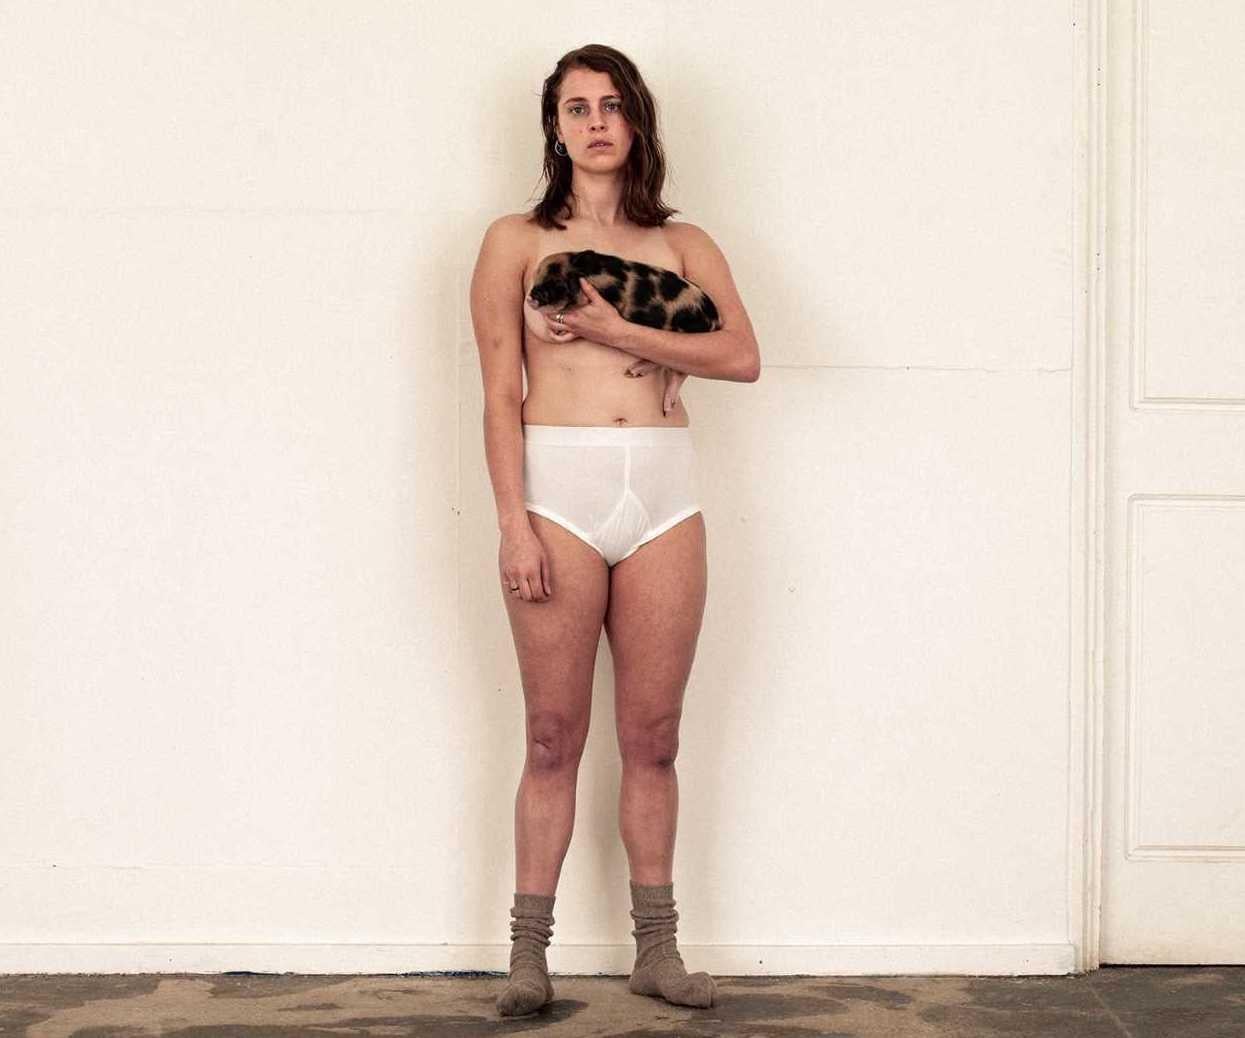 Black Bbw Pussy Pounded - Marika Hackman review, Any Human Friend: Blunt and bold album has a dark  sexual energy | The Independent | The Independent